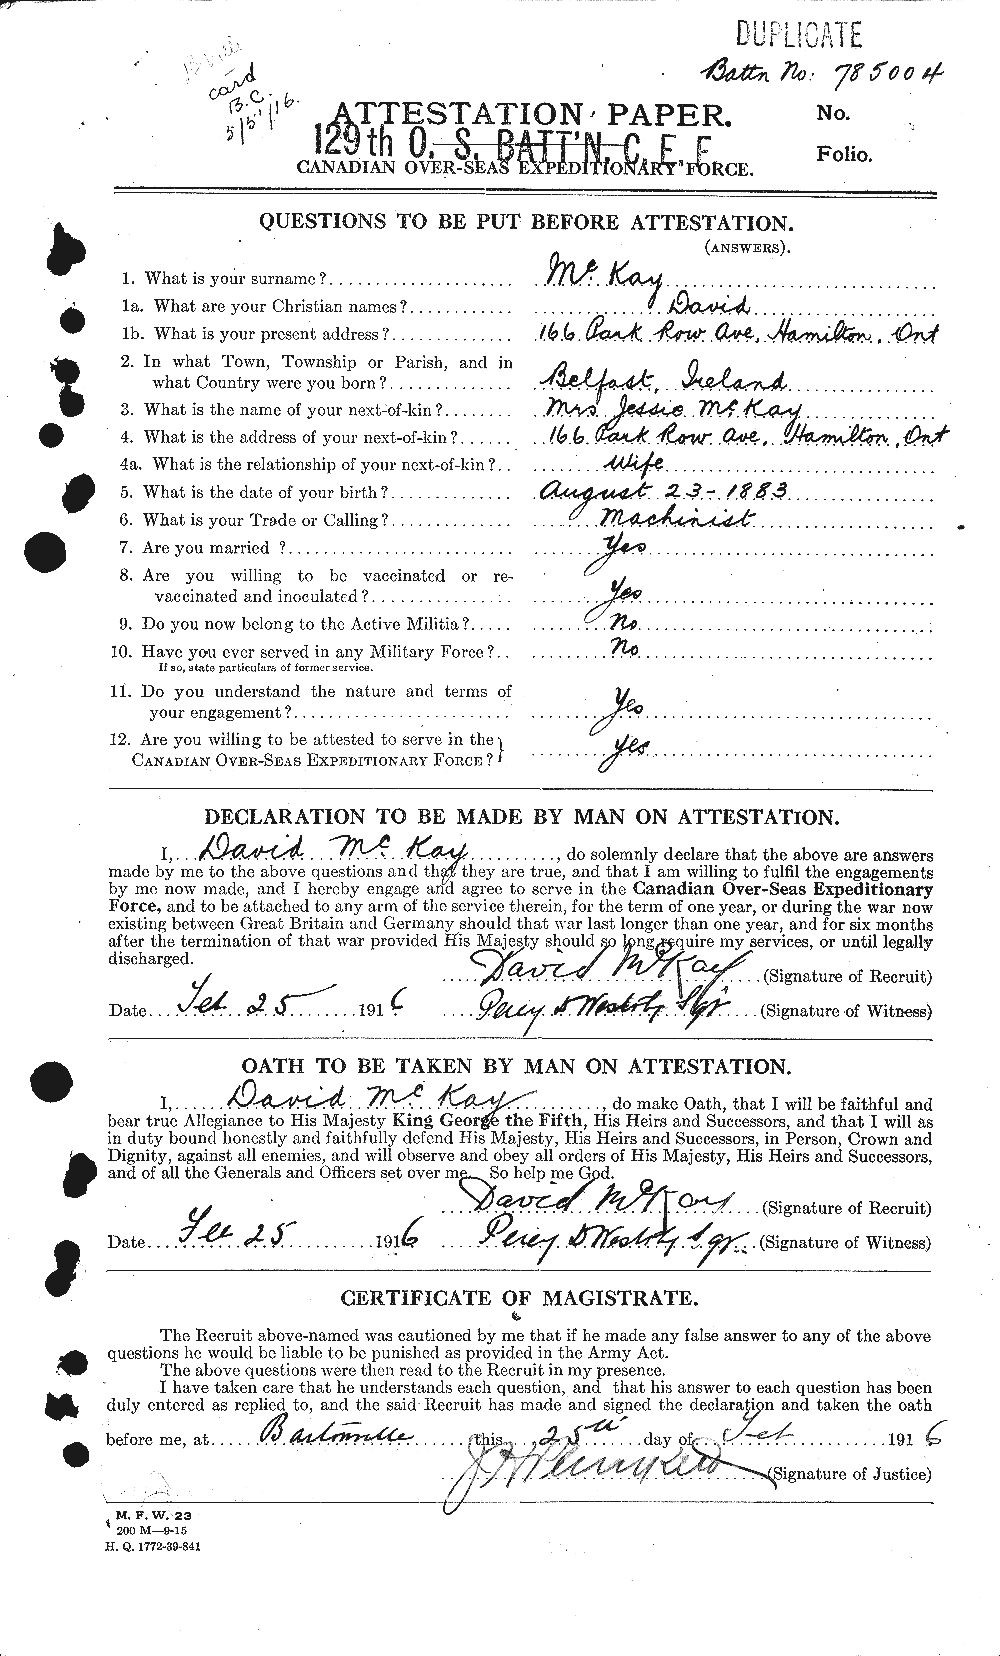 Personnel Records of the First World War - CEF 531132a